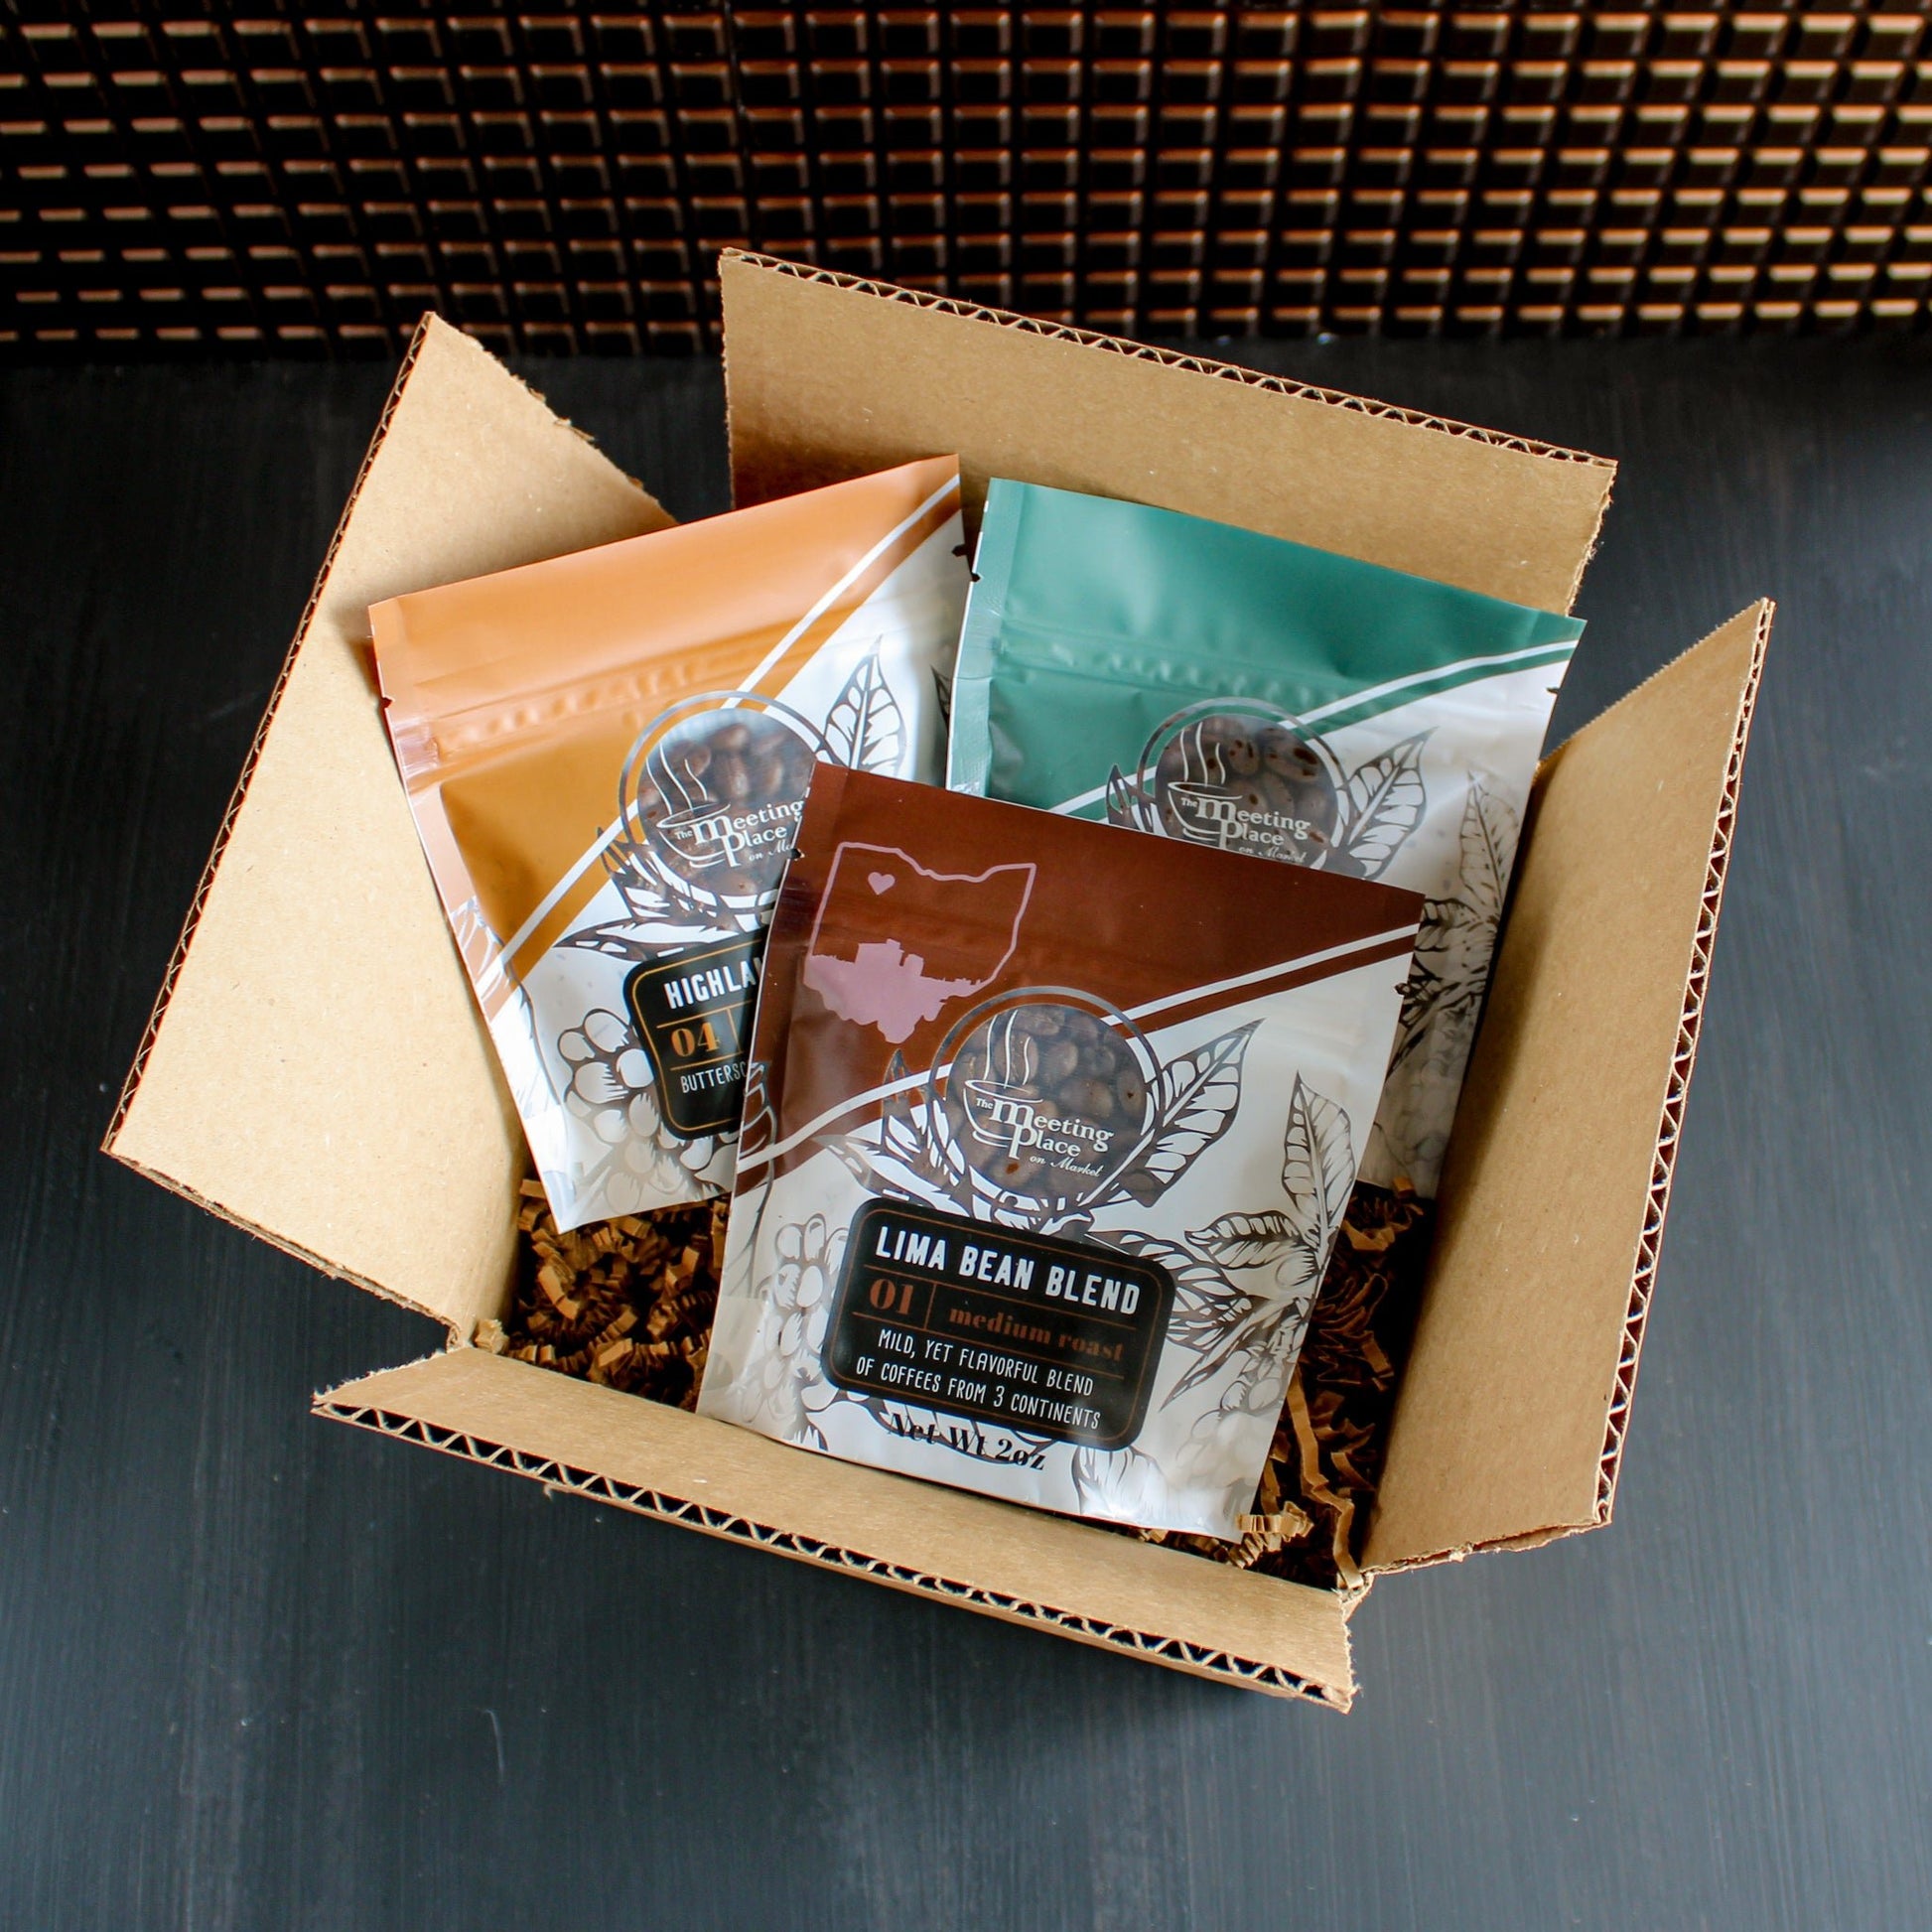 Coffee of the Month Sampler Subscription Box, 2 oz. Bags Whole Bean or Ground Subscription Box - The Meeting Place on Market